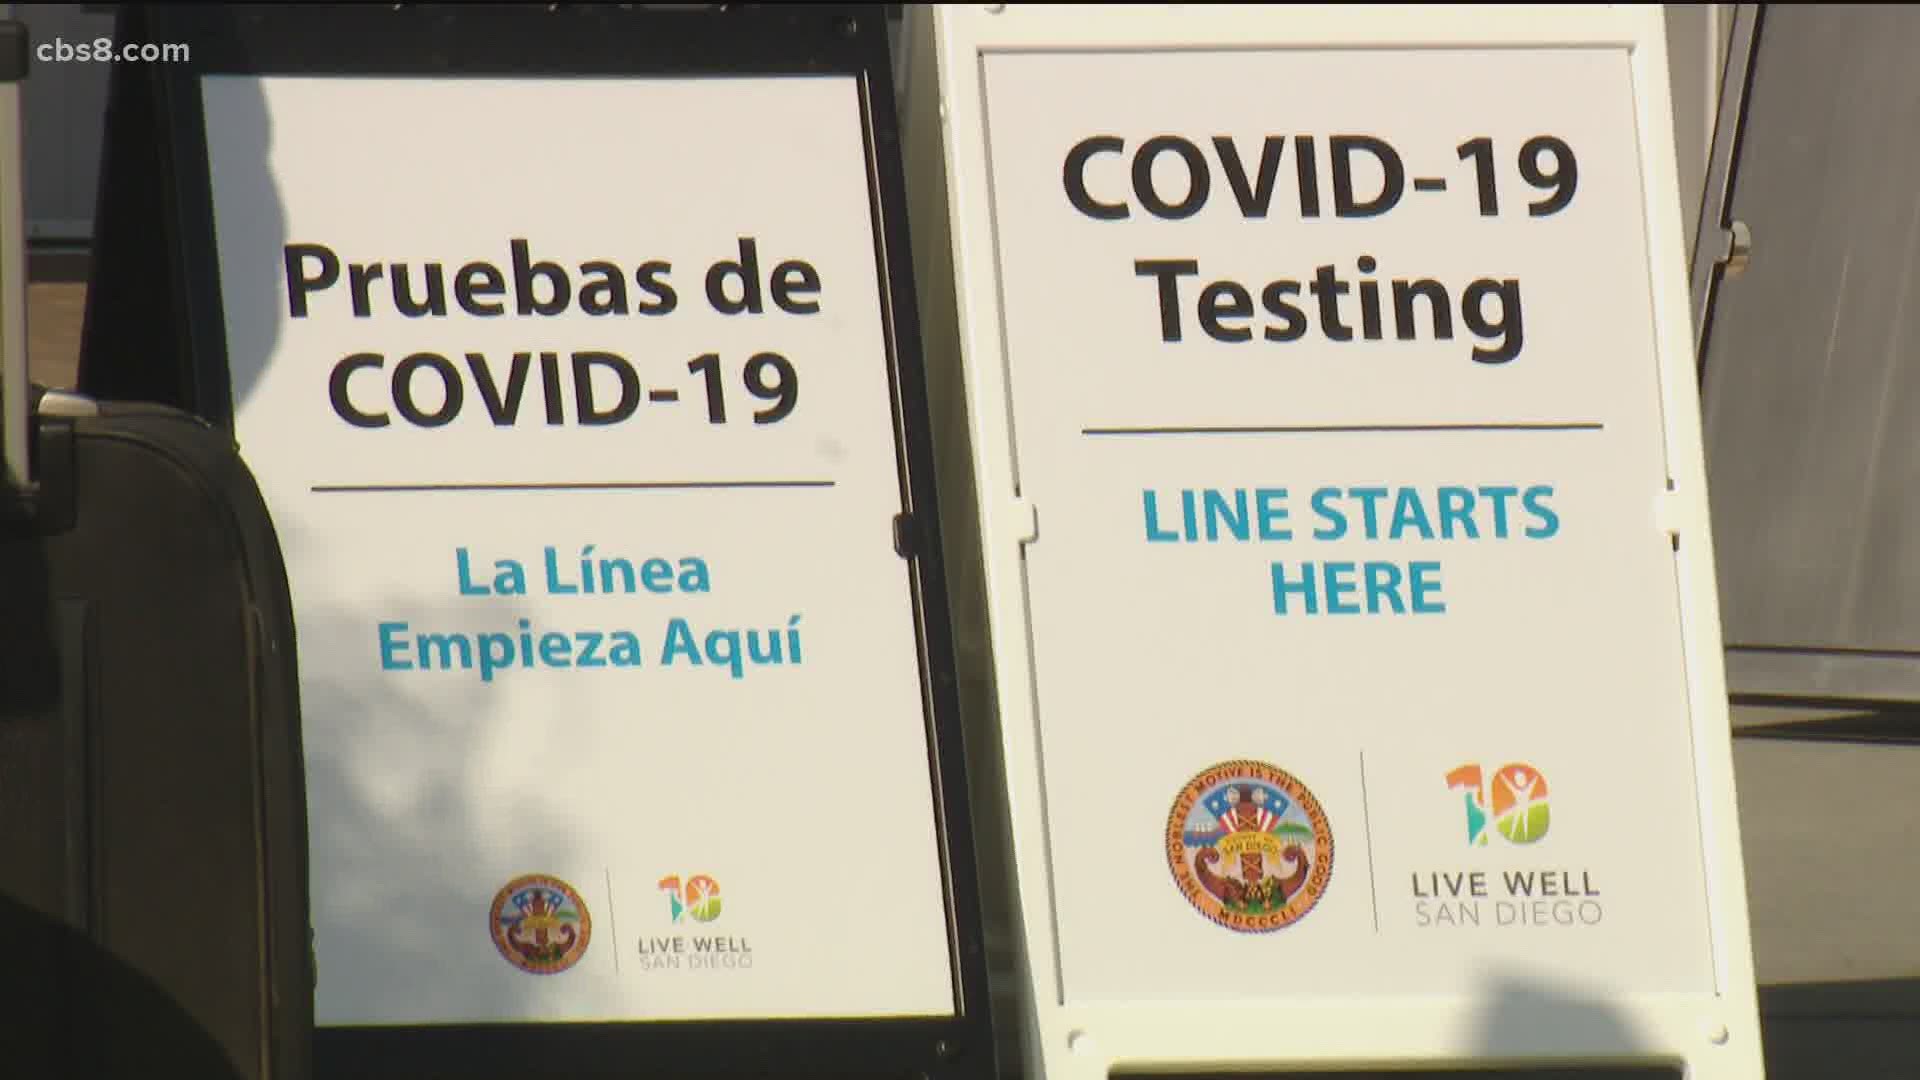 The free site will operate from 6:30 to 10:30 a.m. Monday through Friday and will focus on testing essential workers and American citizens who live in Tijuana.